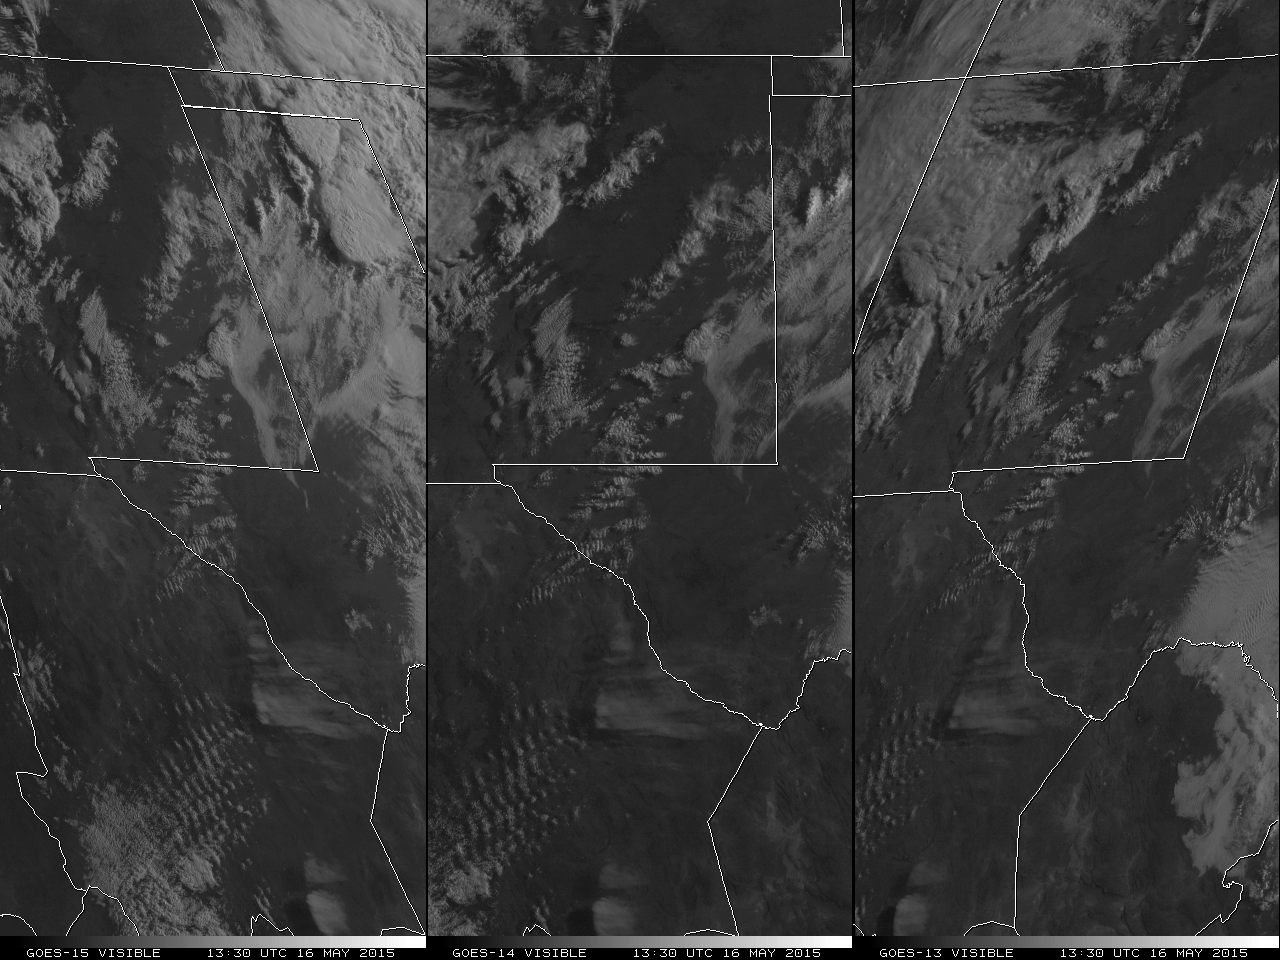 GOES-15 (left), GOES-14 (center), and GOES-13 (right) 0.63 µm visible and 6.5 µm water vapor channel images